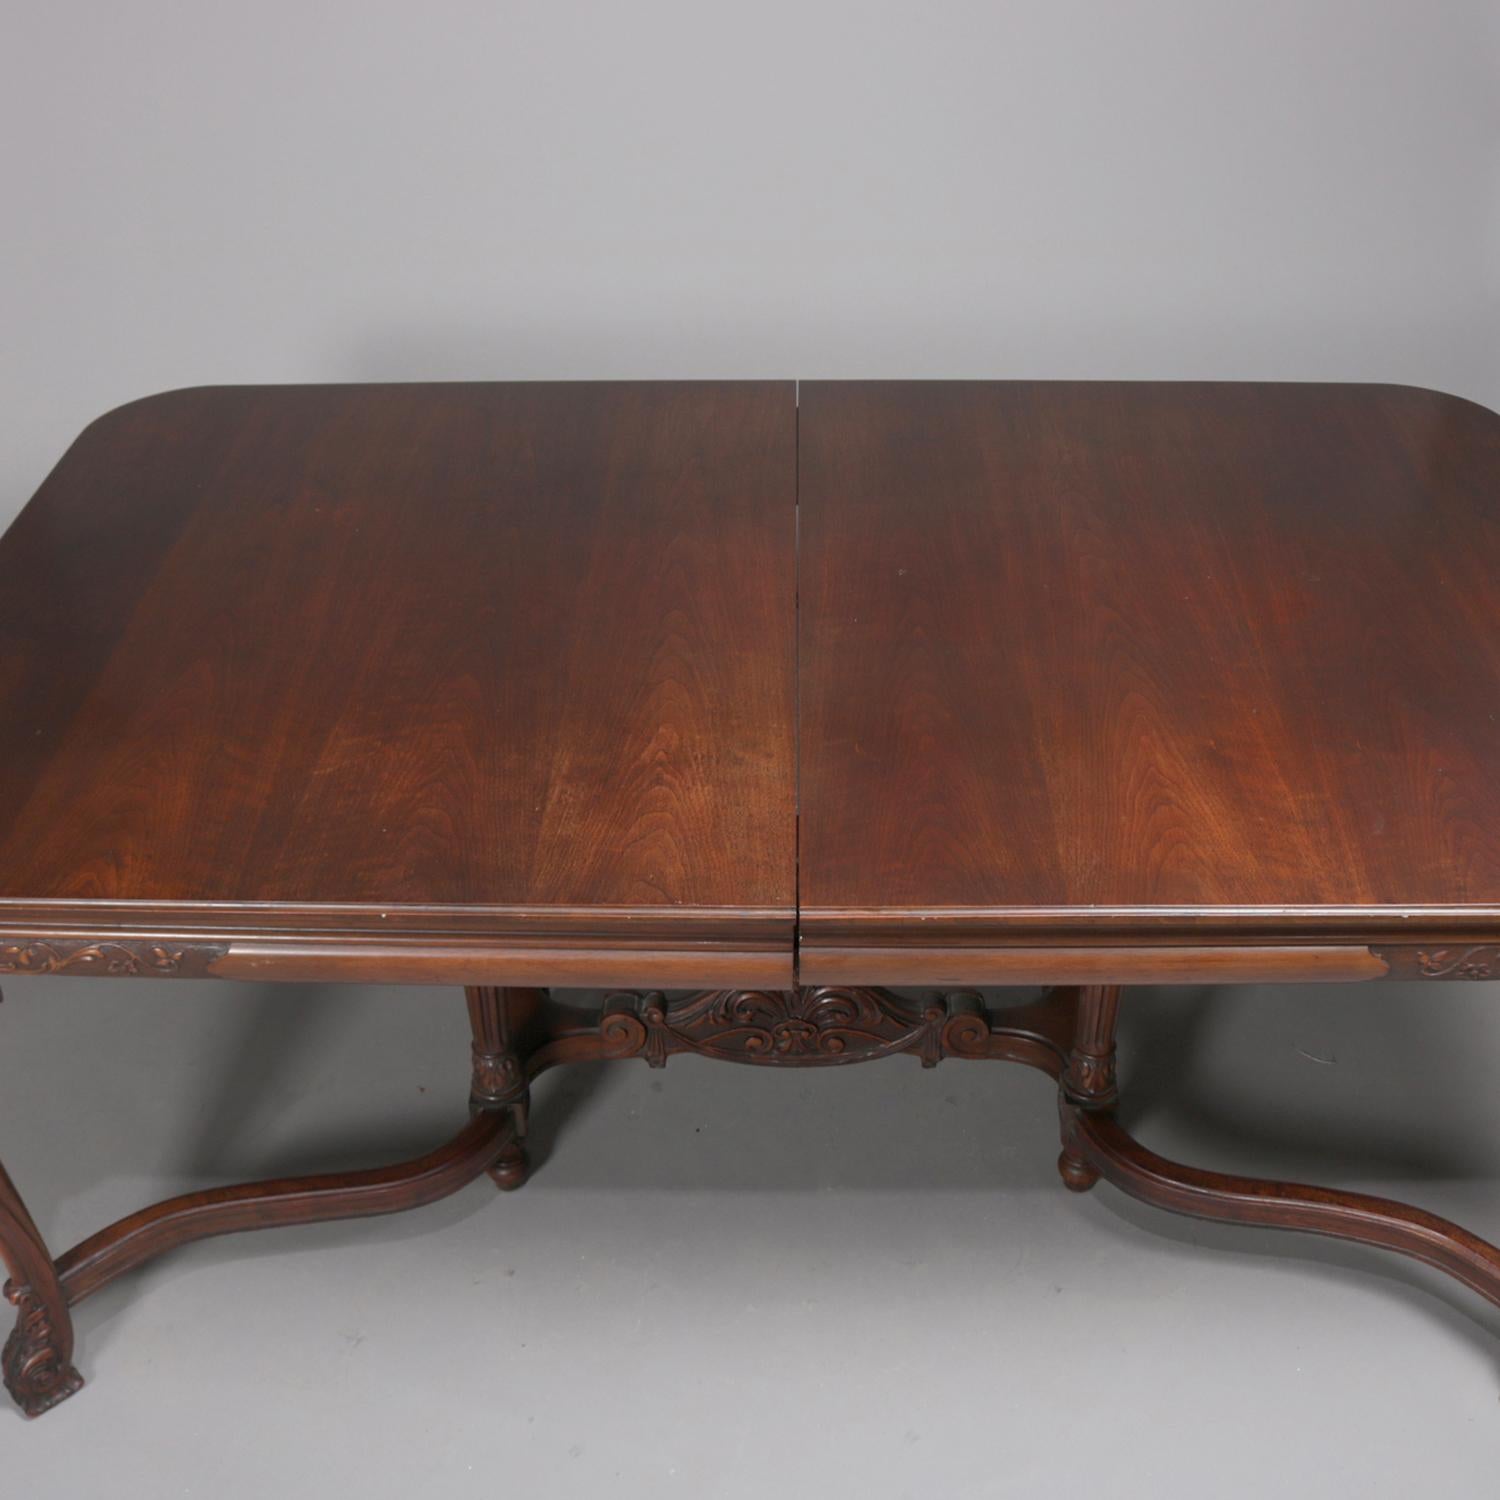 Upholstery English Chippendale Style Carved Walnut Dining Table and 6 Chairs, 20th Century